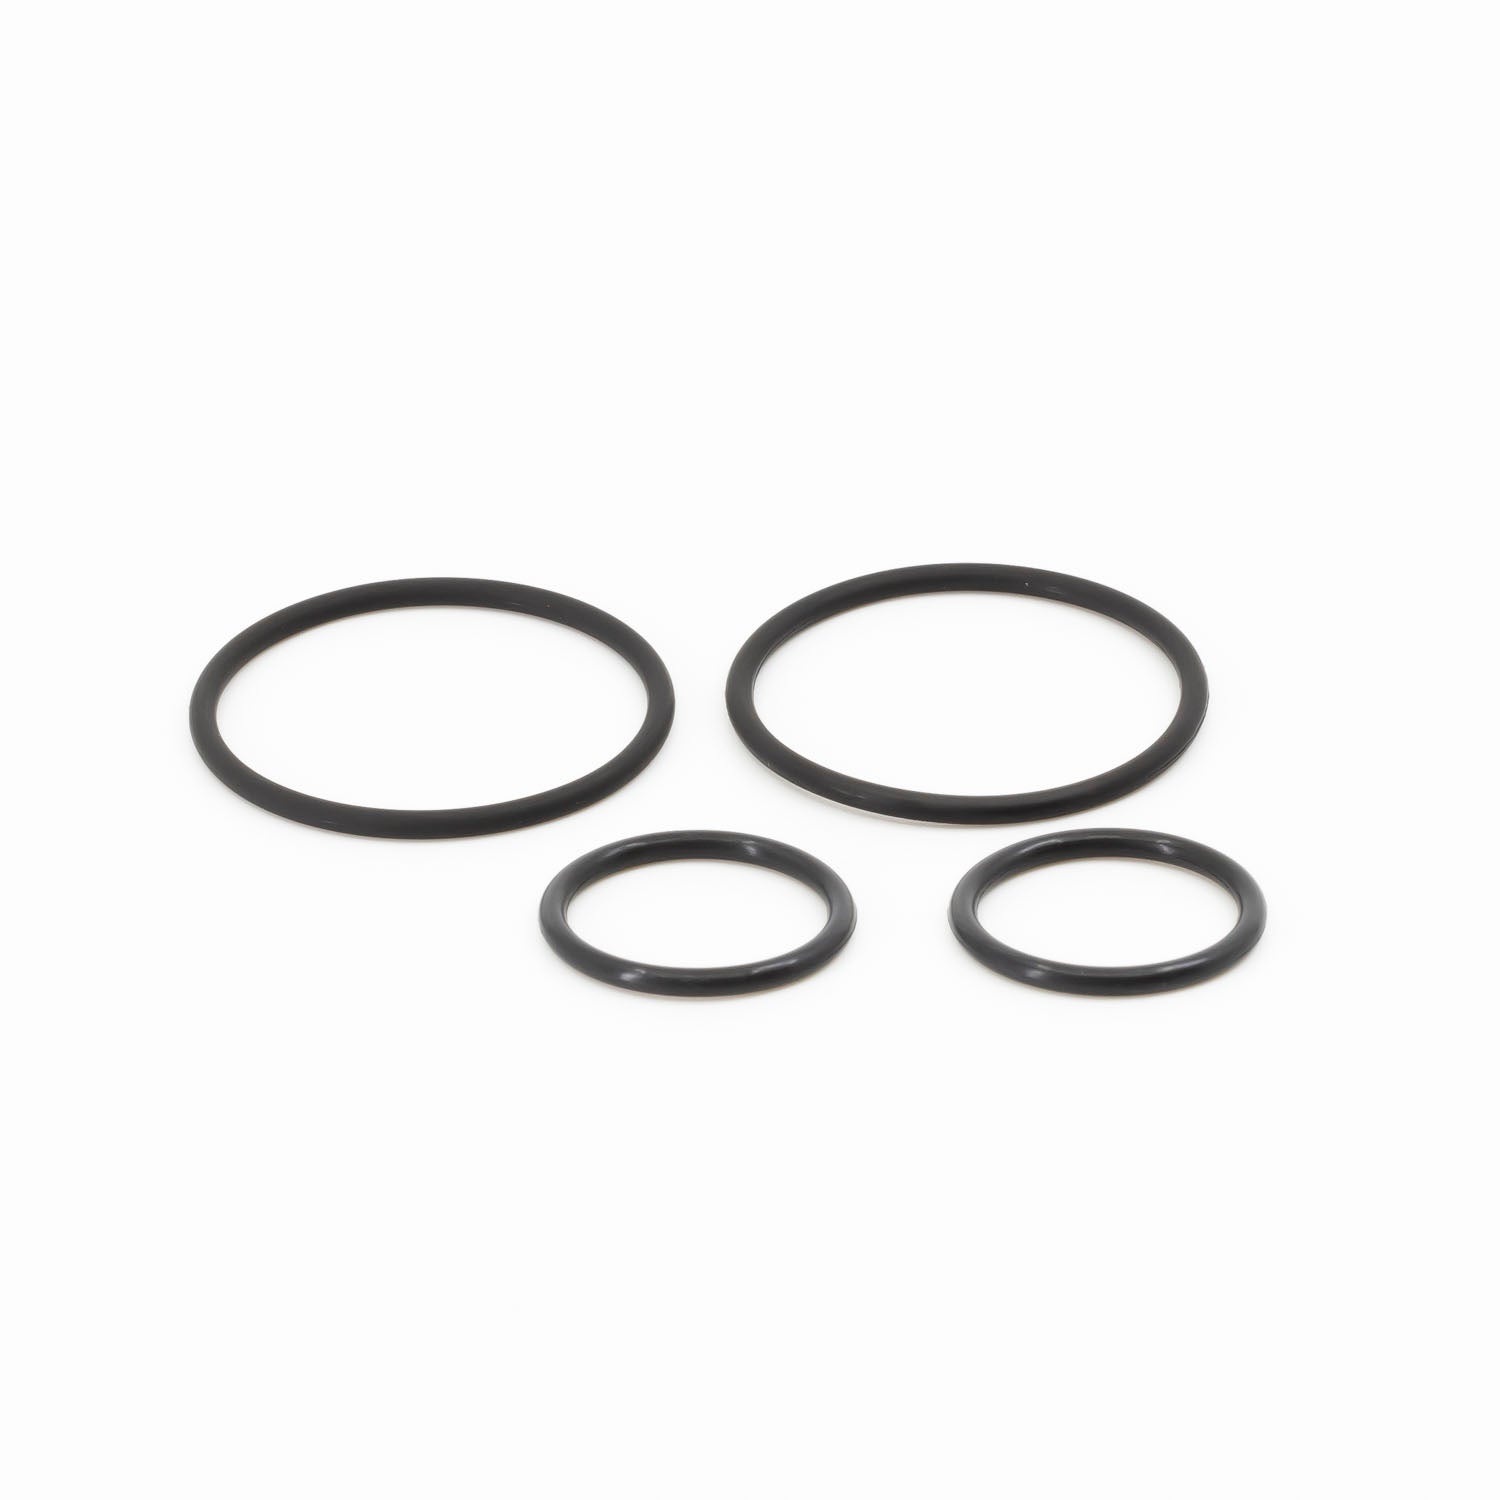 K2016 Goyen 3 series Pulse jet valve RCAC20T3 RCAC20DD3 RCAC20ST3 Diaphragm  Maintenance Kits - Buy K2016, RCAC20FS3, RCAC20T3 Product on Ningbo Fly  Automation Co., Limited